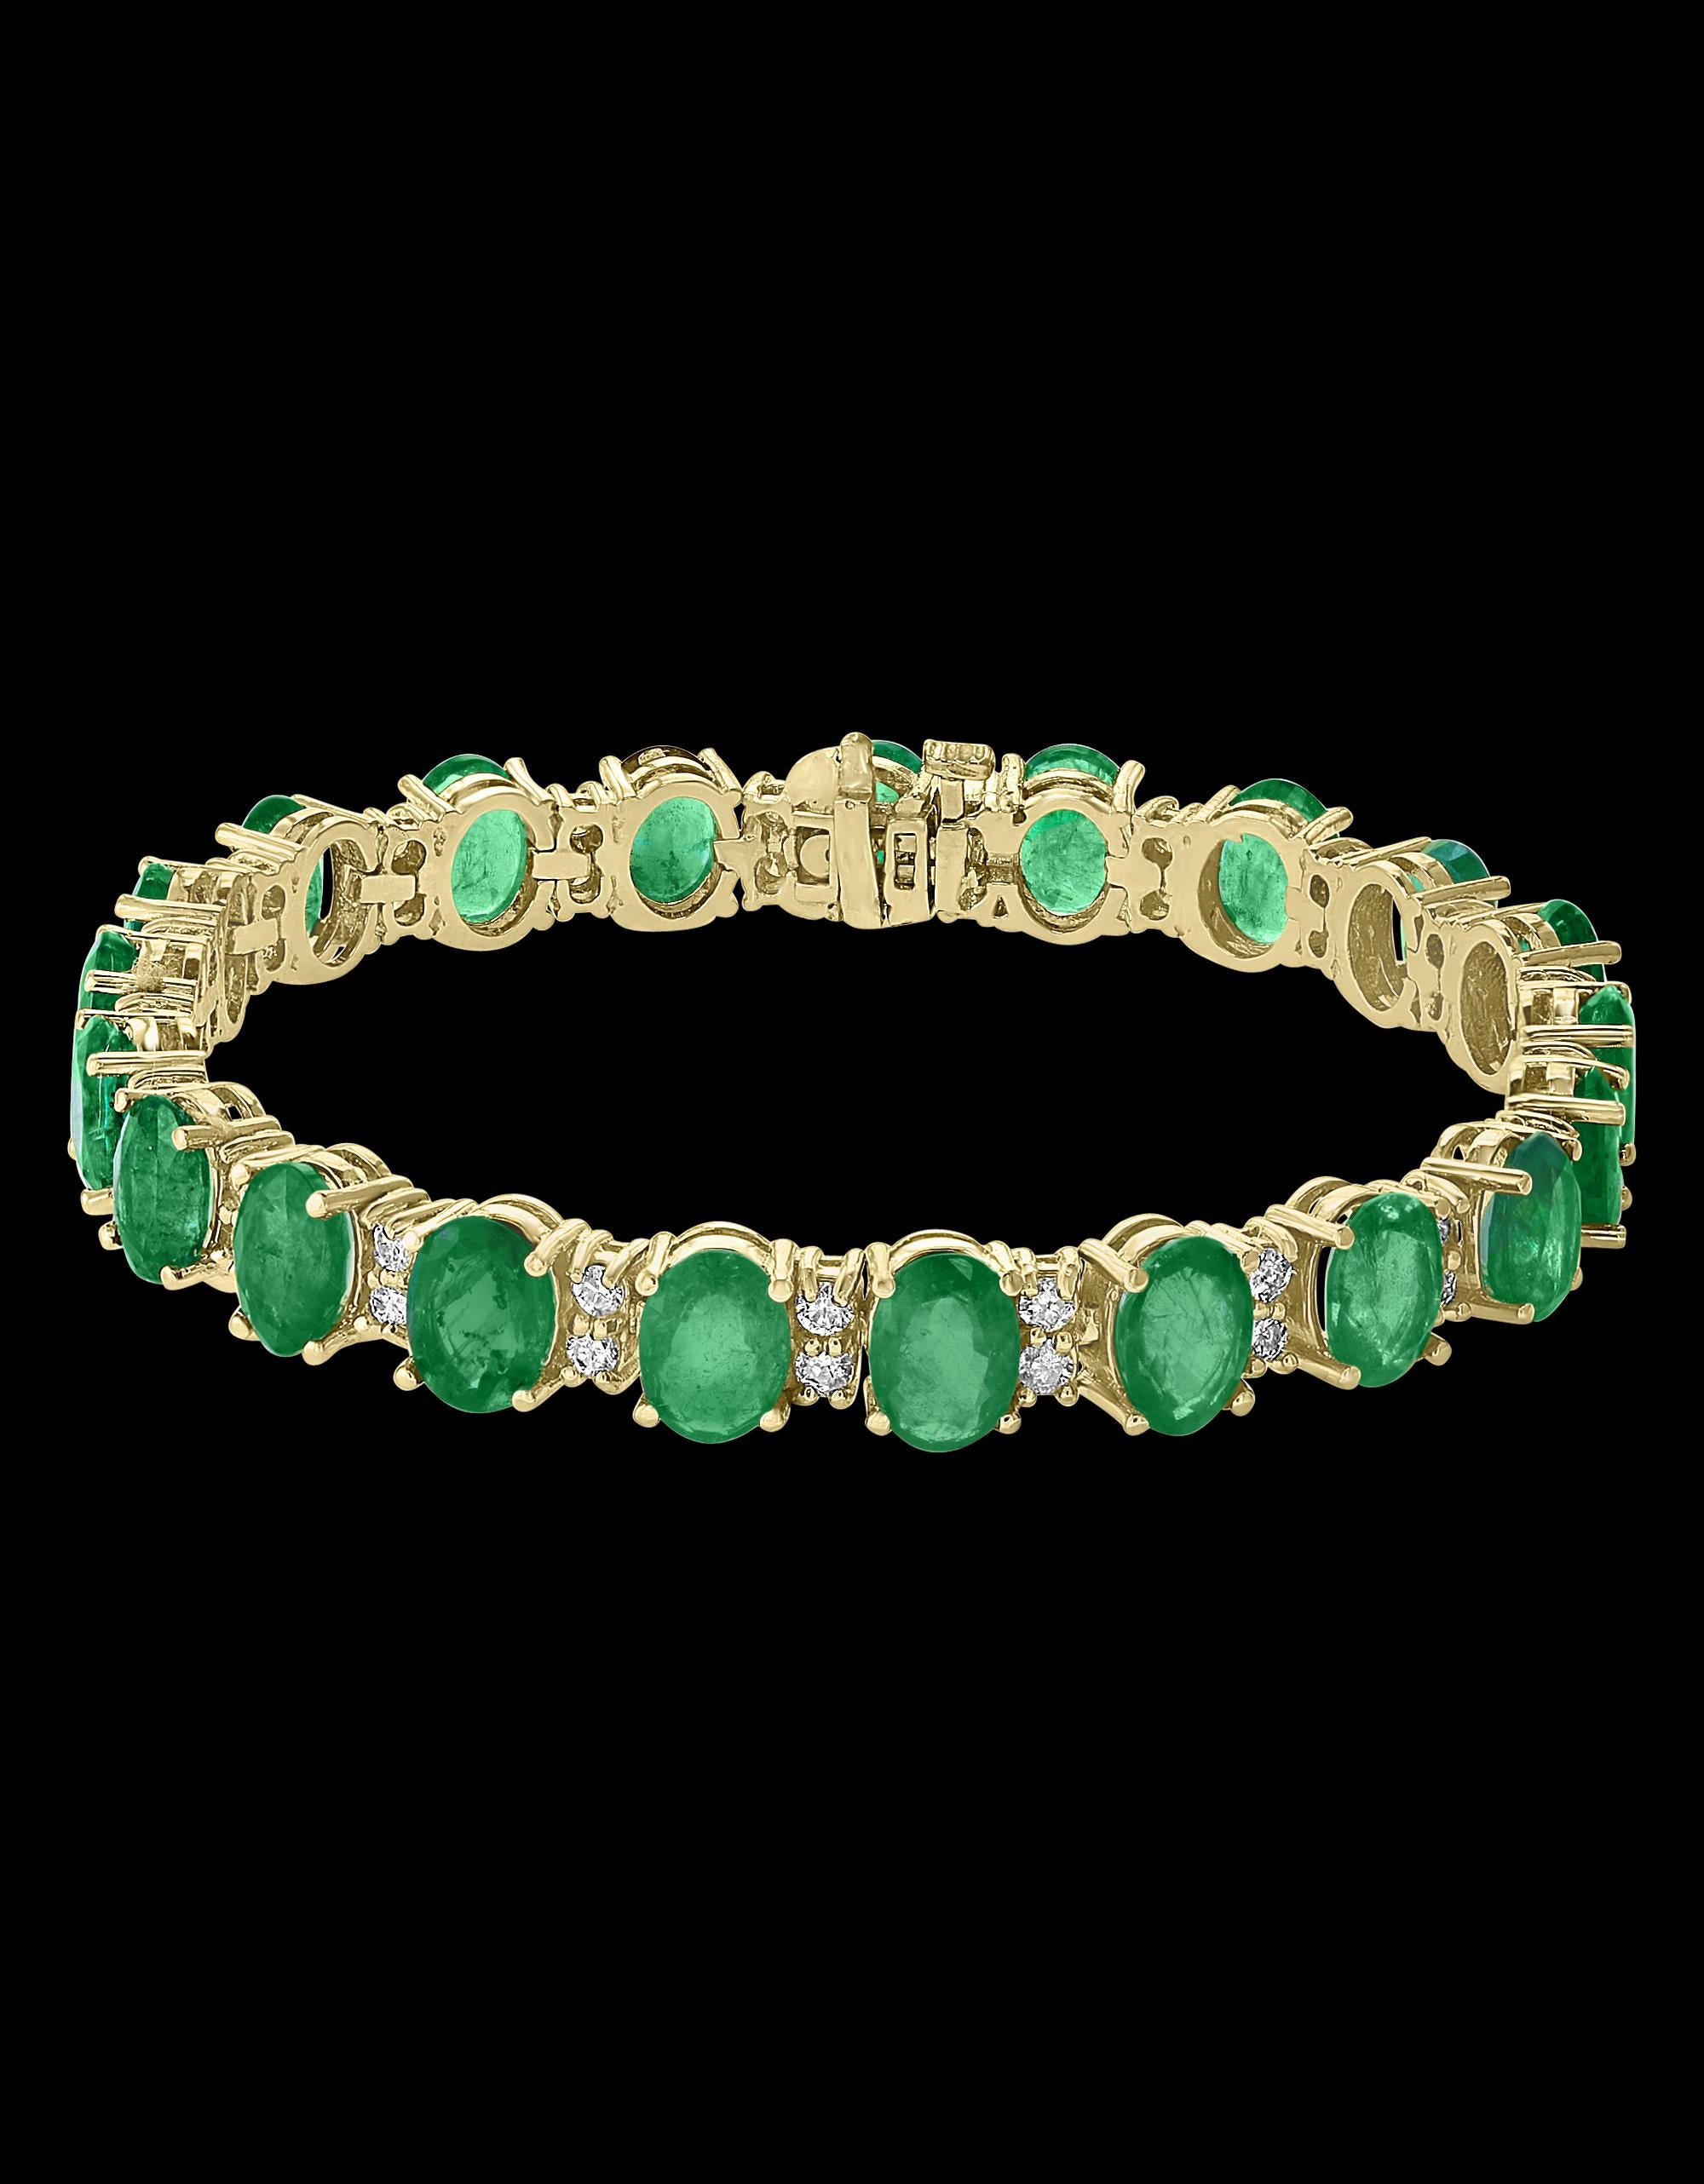  This exceptionally affordable Tennis  bracelet has  21 stones of oval  Emeralds  . Each Emerald is spaced by two diamonds . Total Weight of Emeralds is 25 carat. Total number of diamonds are 40 and diamond weighs 1.2 ct.
The bracelet is expertly